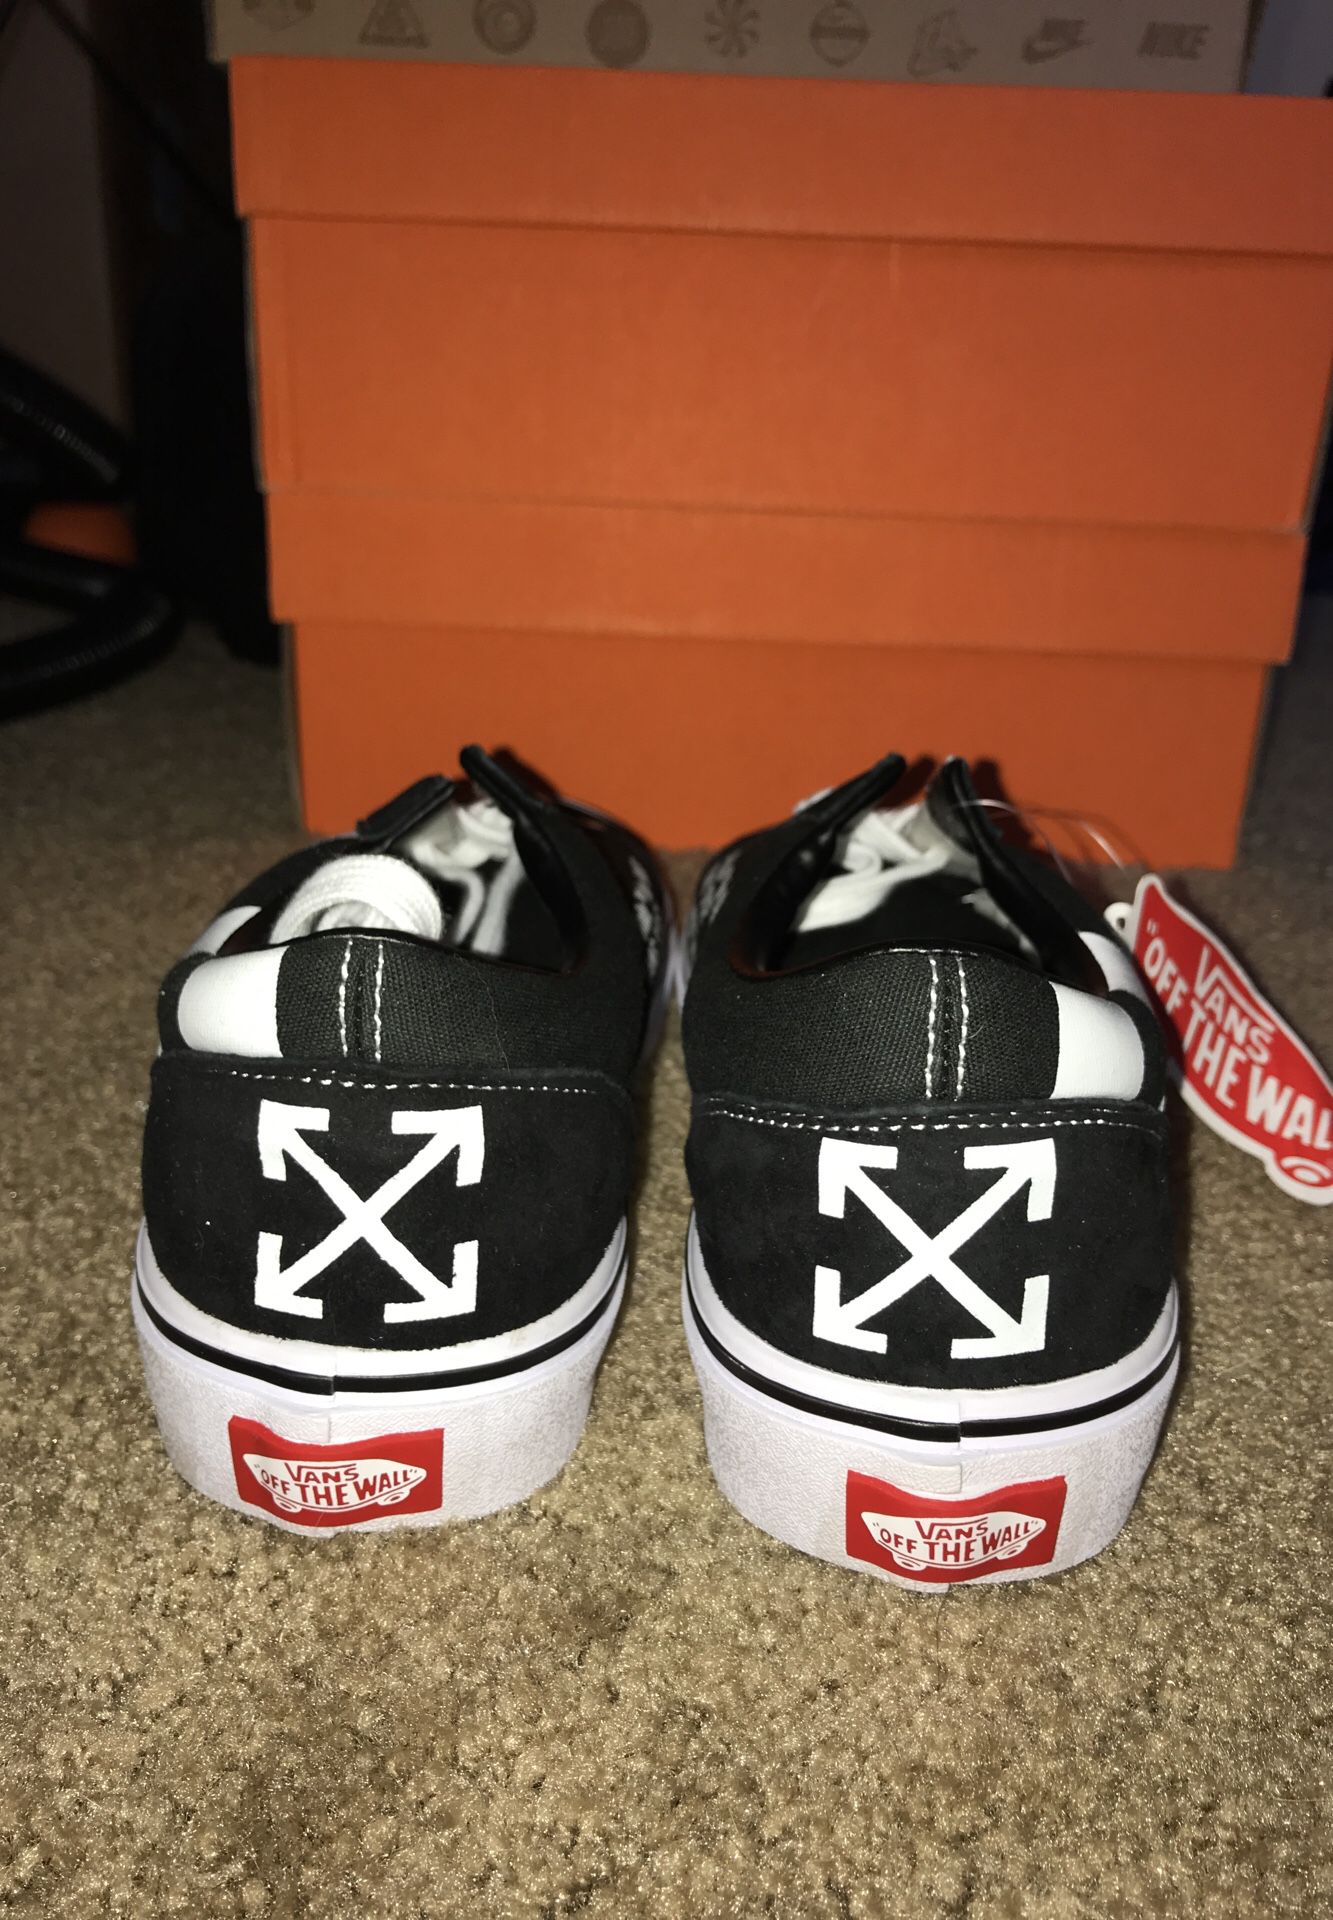 Supreme x Vans Slip-ons (666) Sz 10 for Sale in Bronx, NY - OfferUp